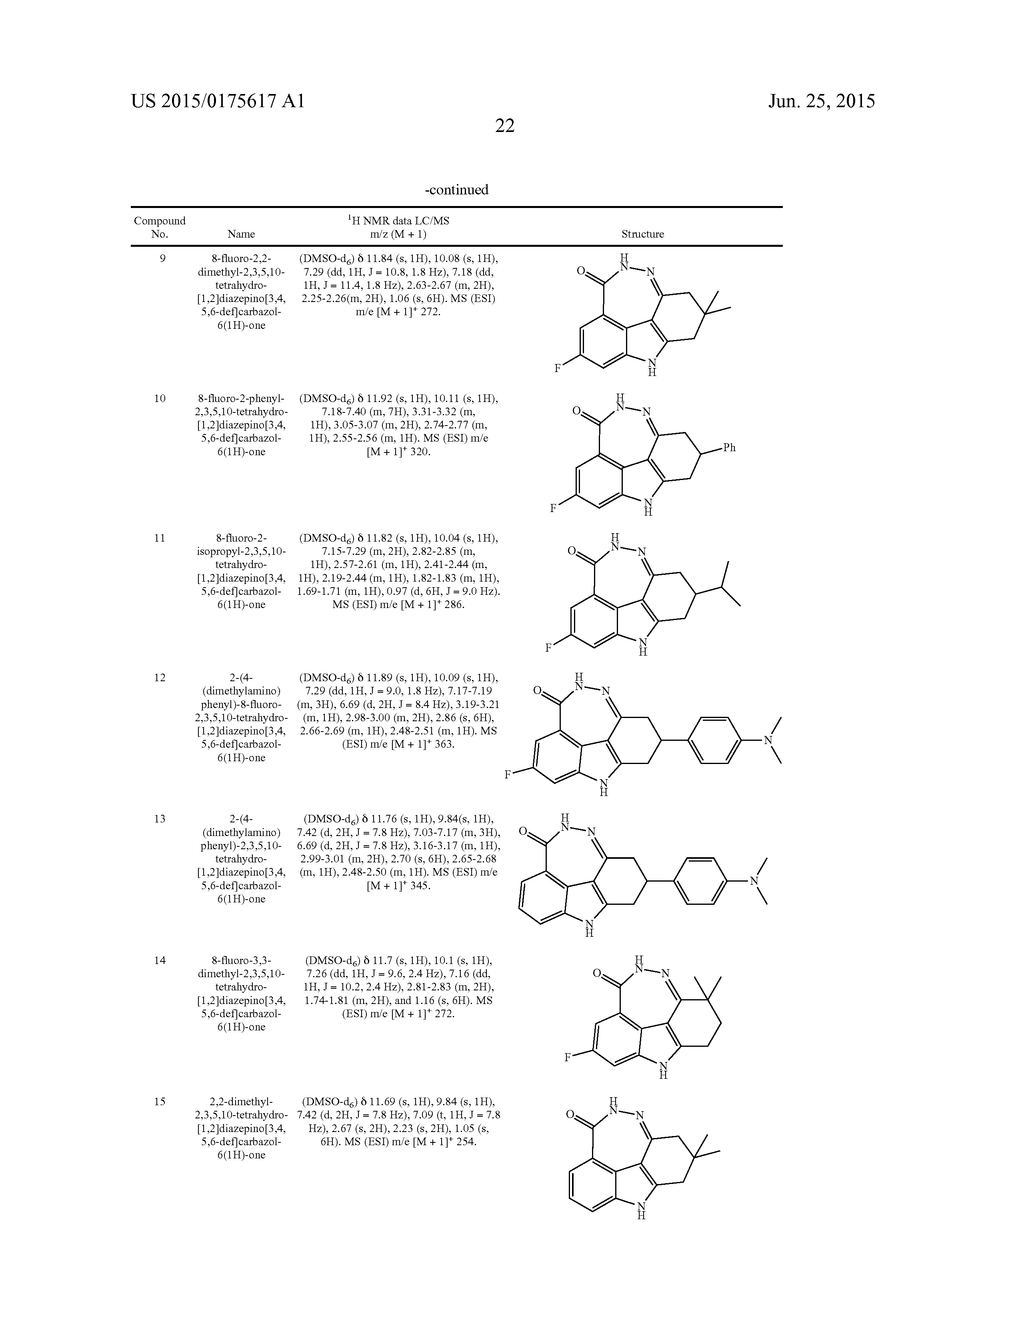 FUSED TETRA OR PENTA-CYCLIC DIHYDRODIAZEPINOCARBAZOLONES AS PARP     INHIBITORS - diagram, schematic, and image 23